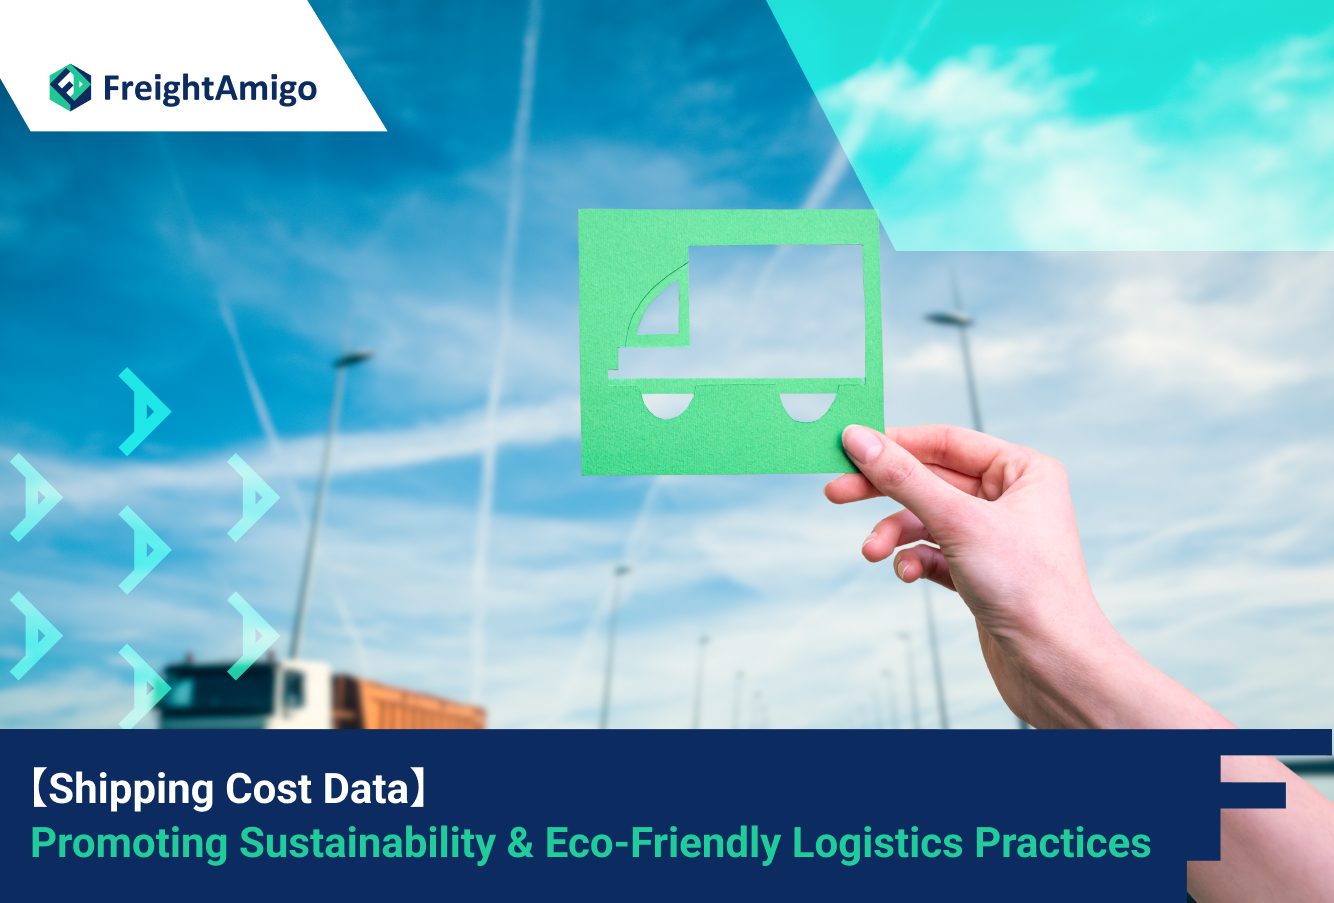 【Shipping Cost Data】Promoting Sustainability & Eco-Friendly Logistics Practices